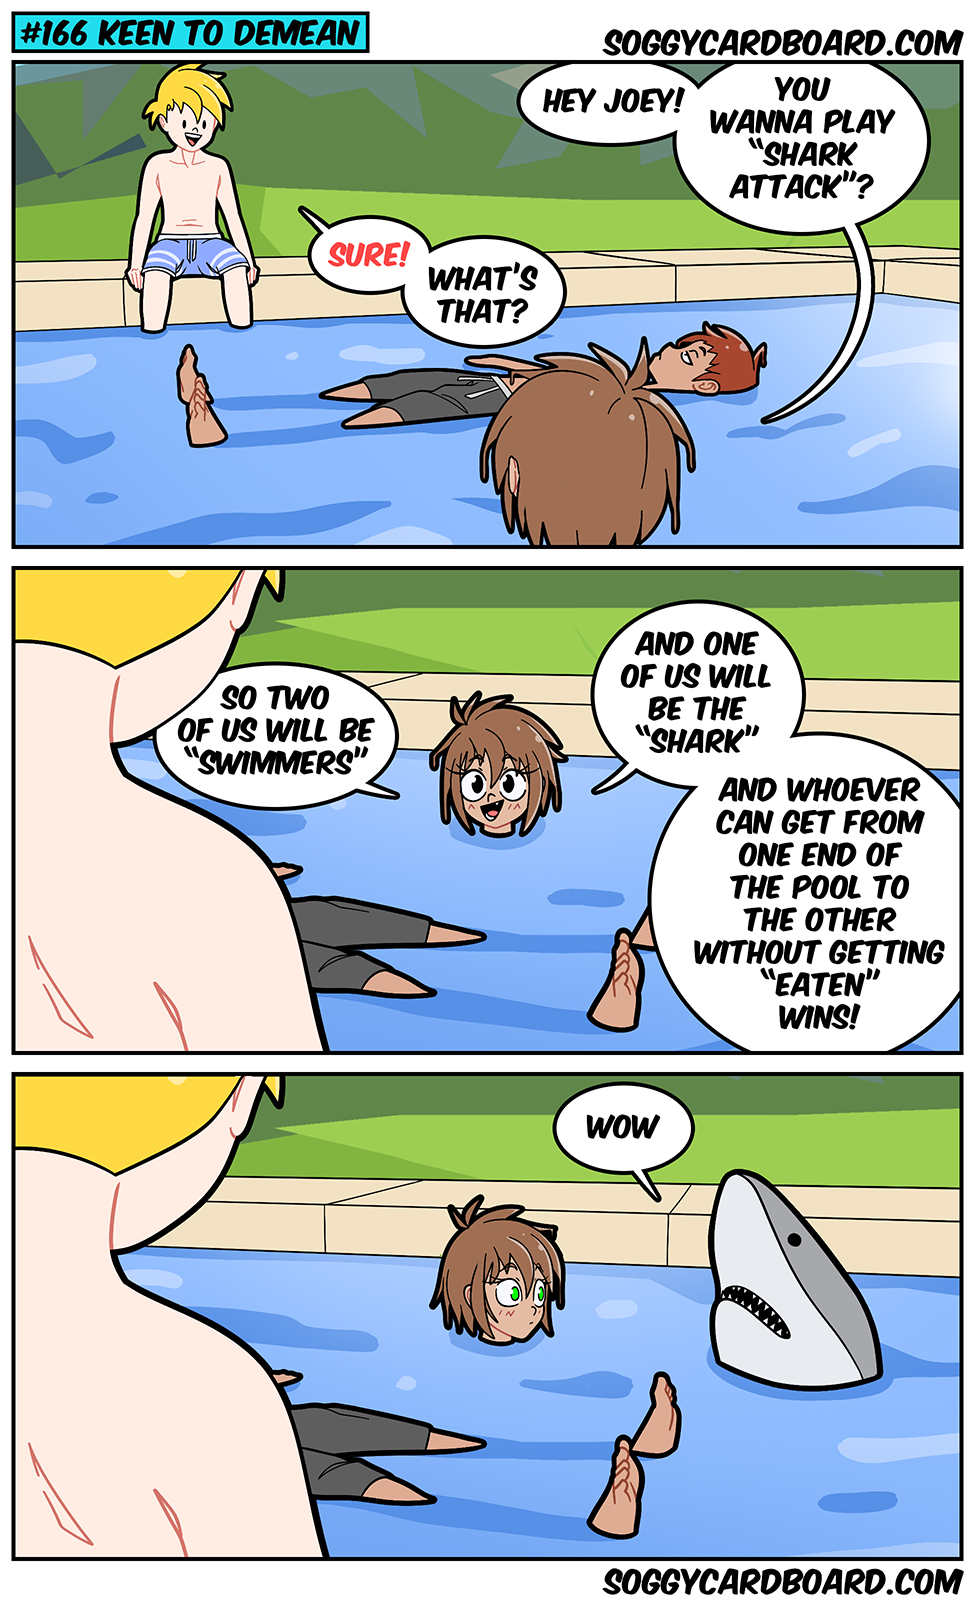 Maybe the shark was just really amazed?